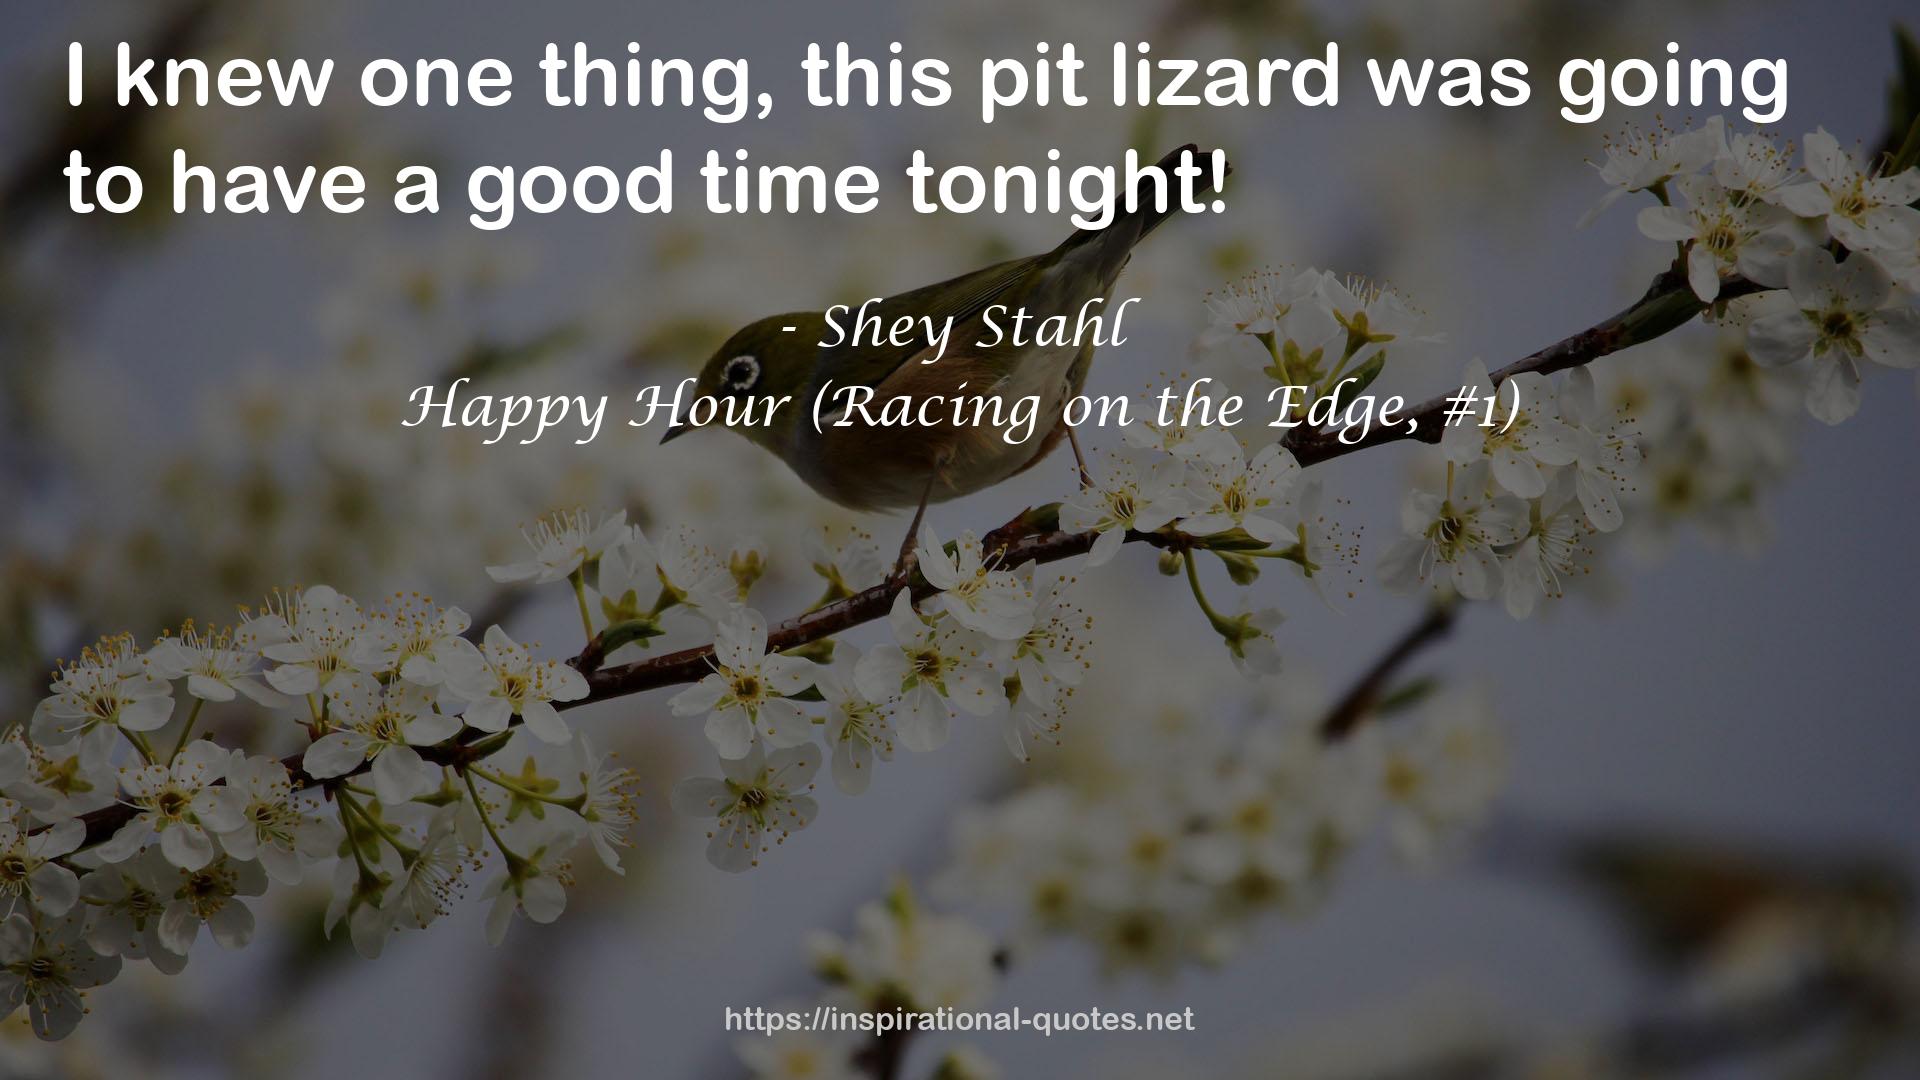 Happy Hour (Racing on the Edge, #1) QUOTES